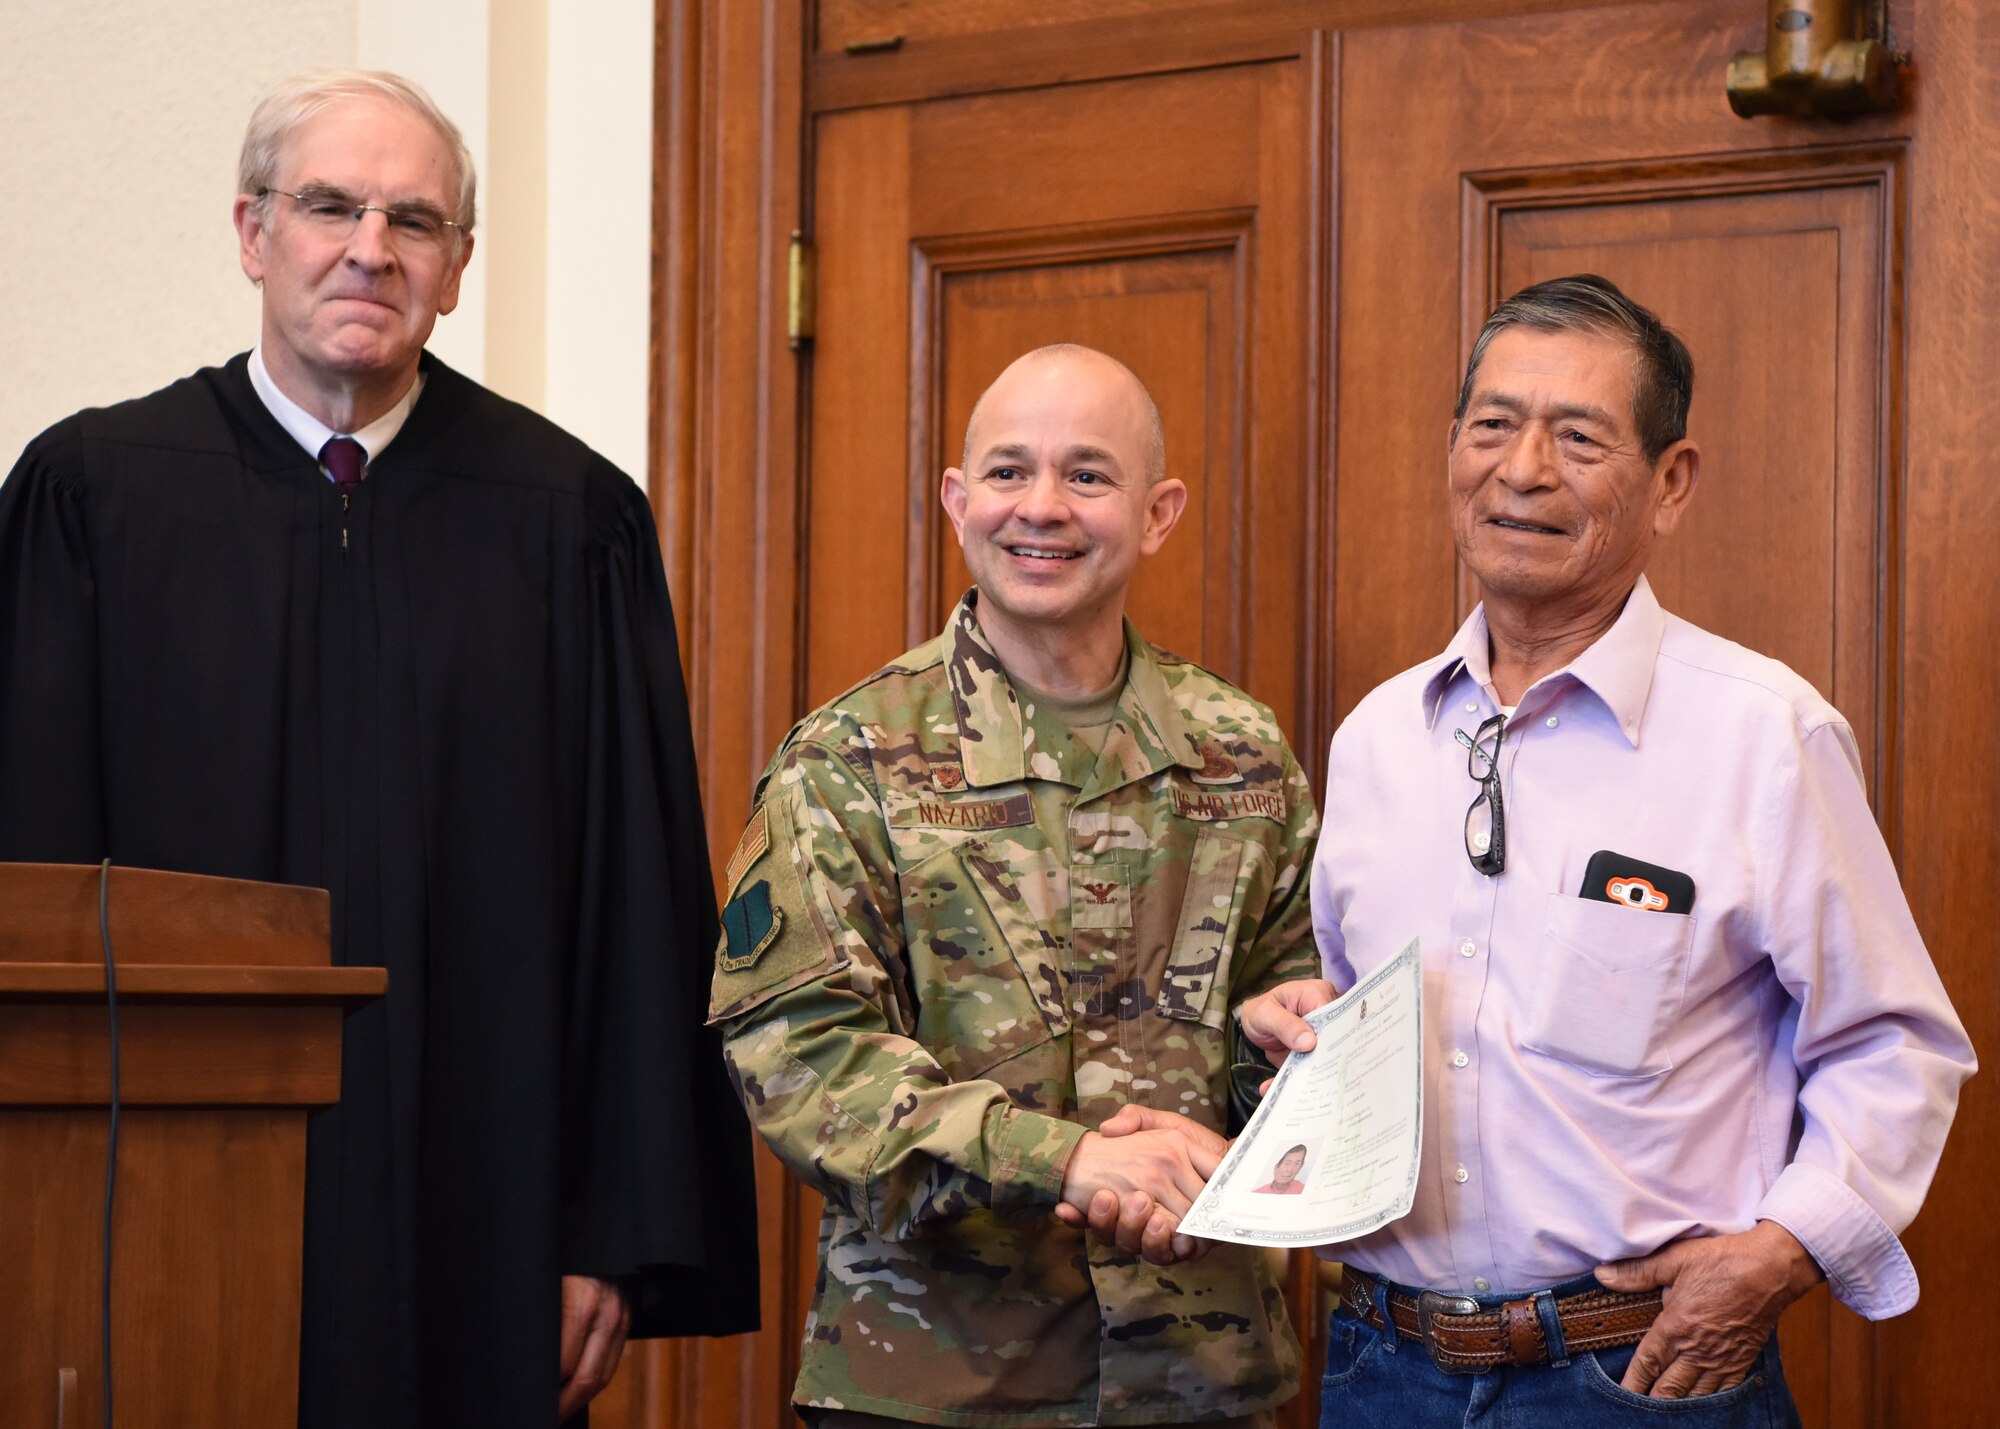 U.S. Air Force Col. Andres Nazario 17th Training Wing commander presents a certificate to Antonio Rojo Gonzalez, a new U.S. citizen at the Naturalization Ceremony in the O.C. Fisher Federal Building September 4, 2019. Rojo Gonzalez was the oldest member of the group at 77 years old. (U.S. Air Force photo by Airman 1st Class Ethan Sherwood)